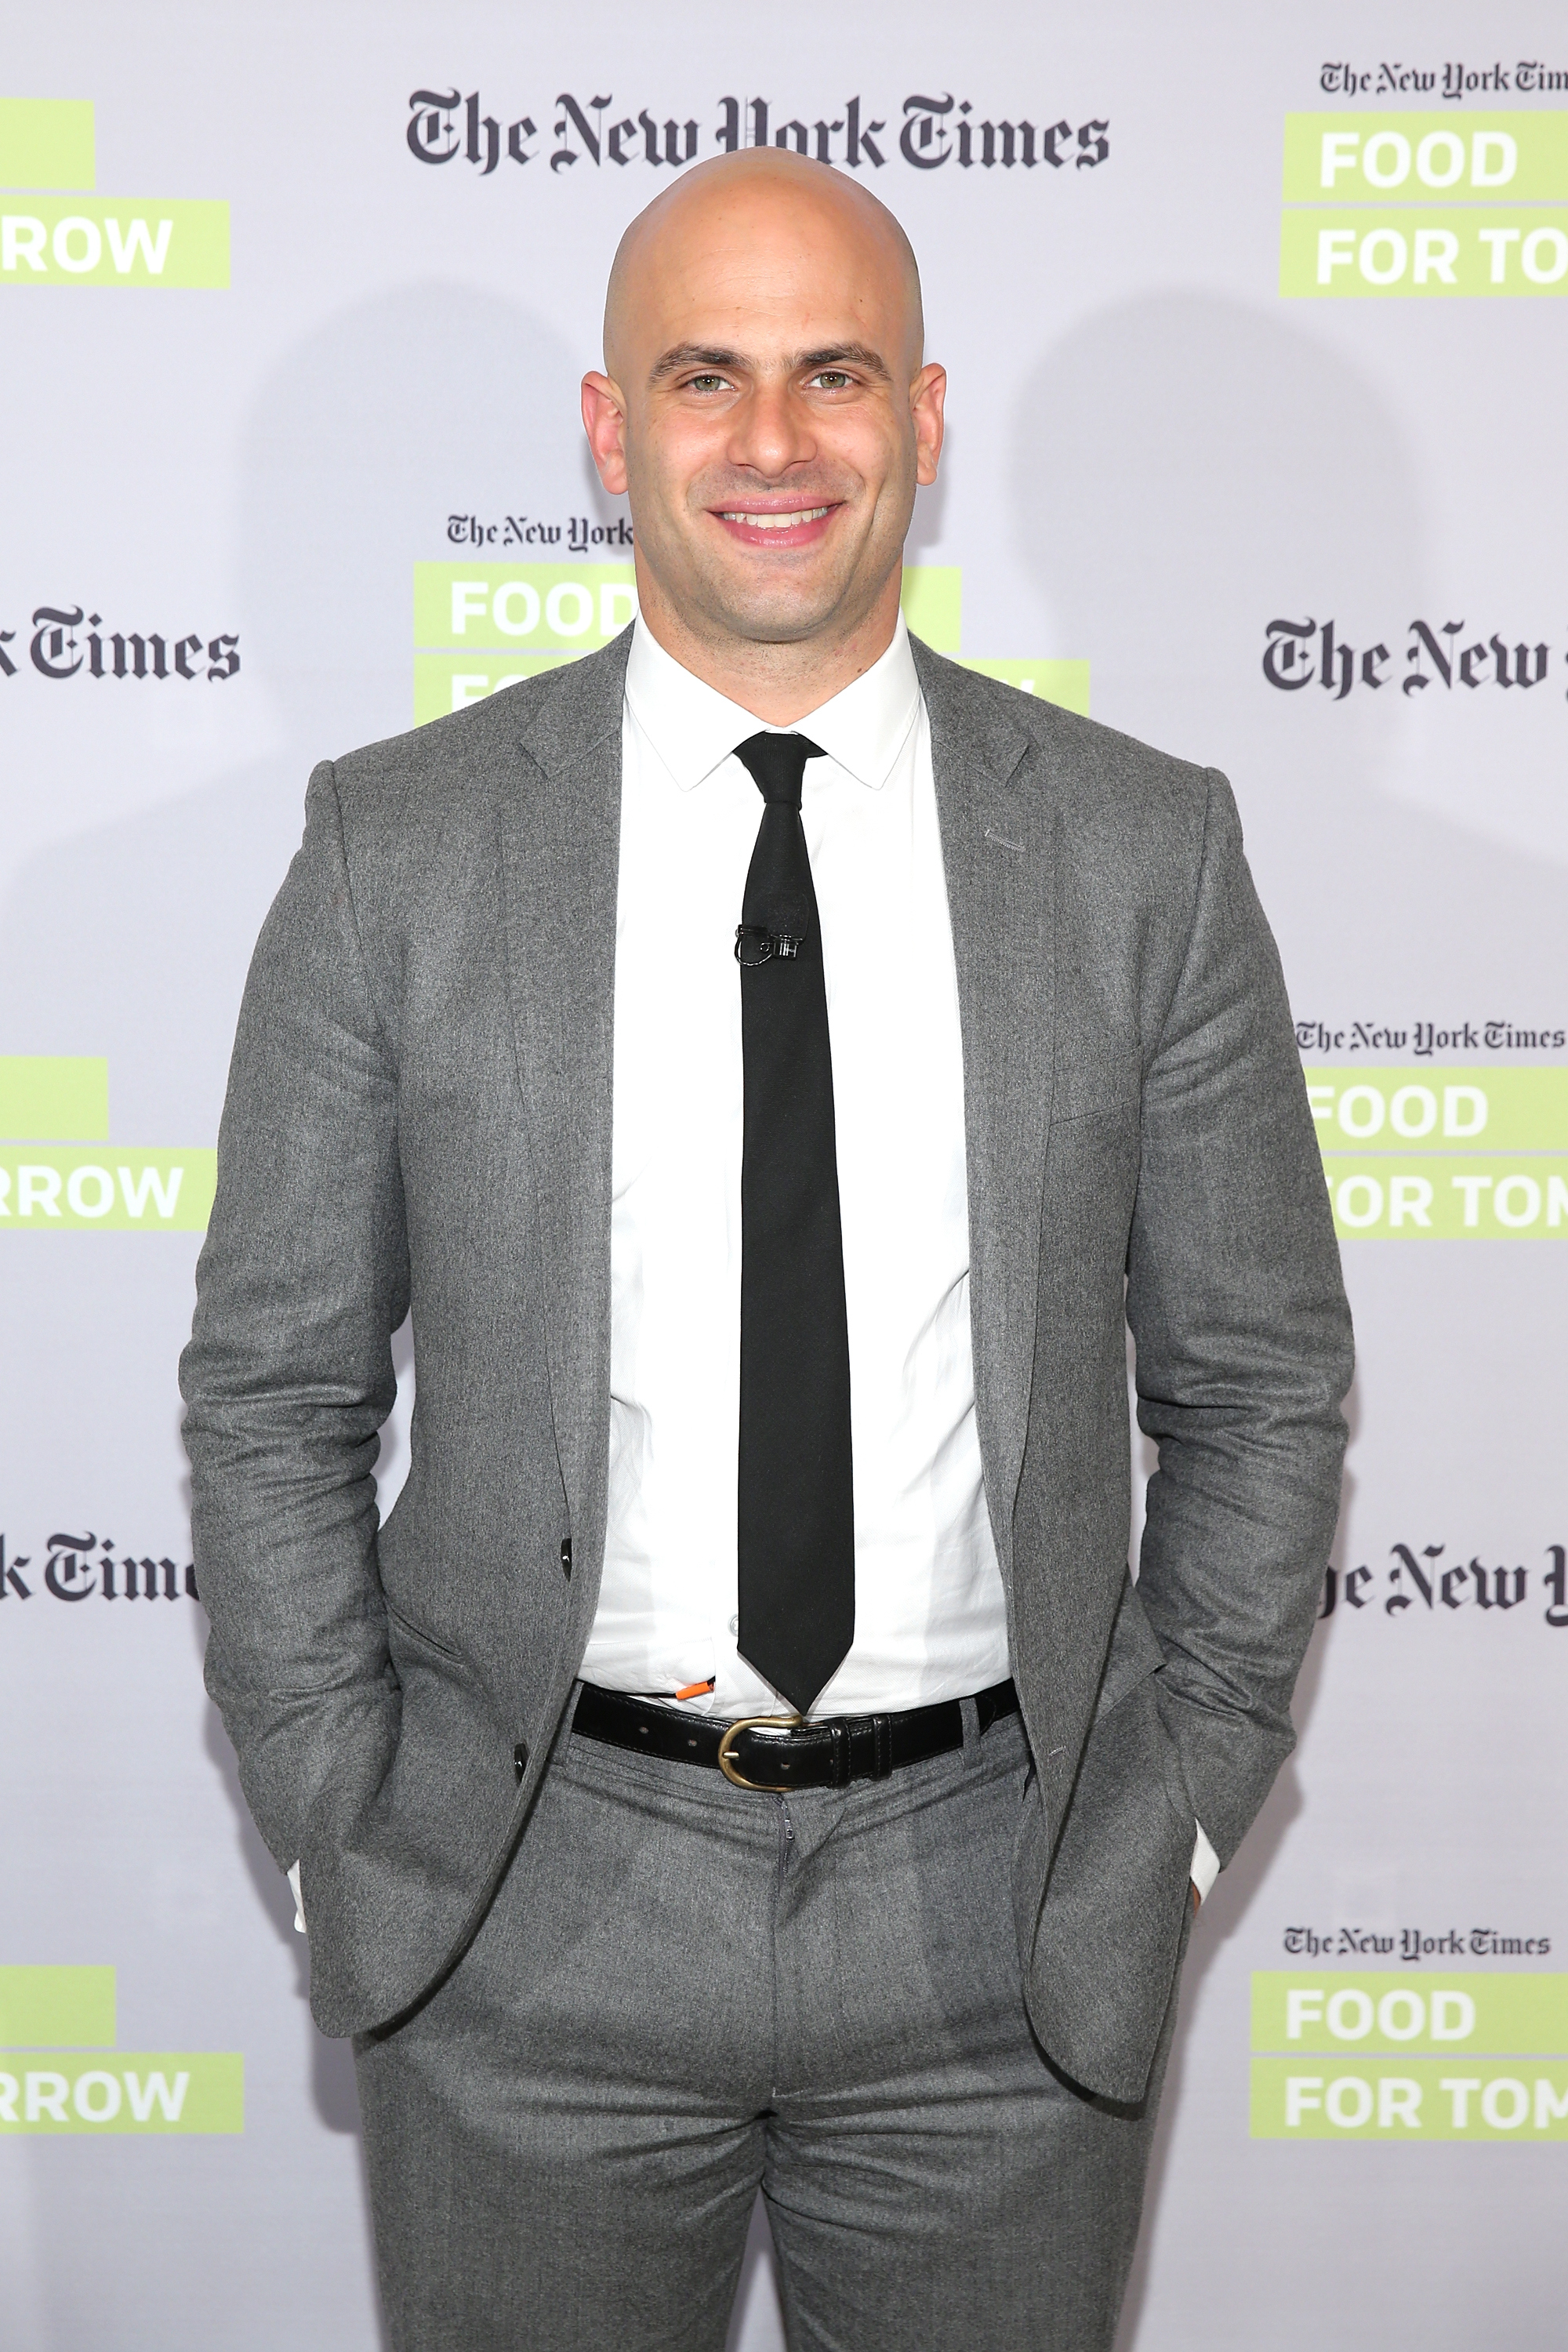 Former White House chef Sam Kass at The New York Times Food For Tomorrow Conference At Stone Barns, New York, on Nov. 12, 2014.